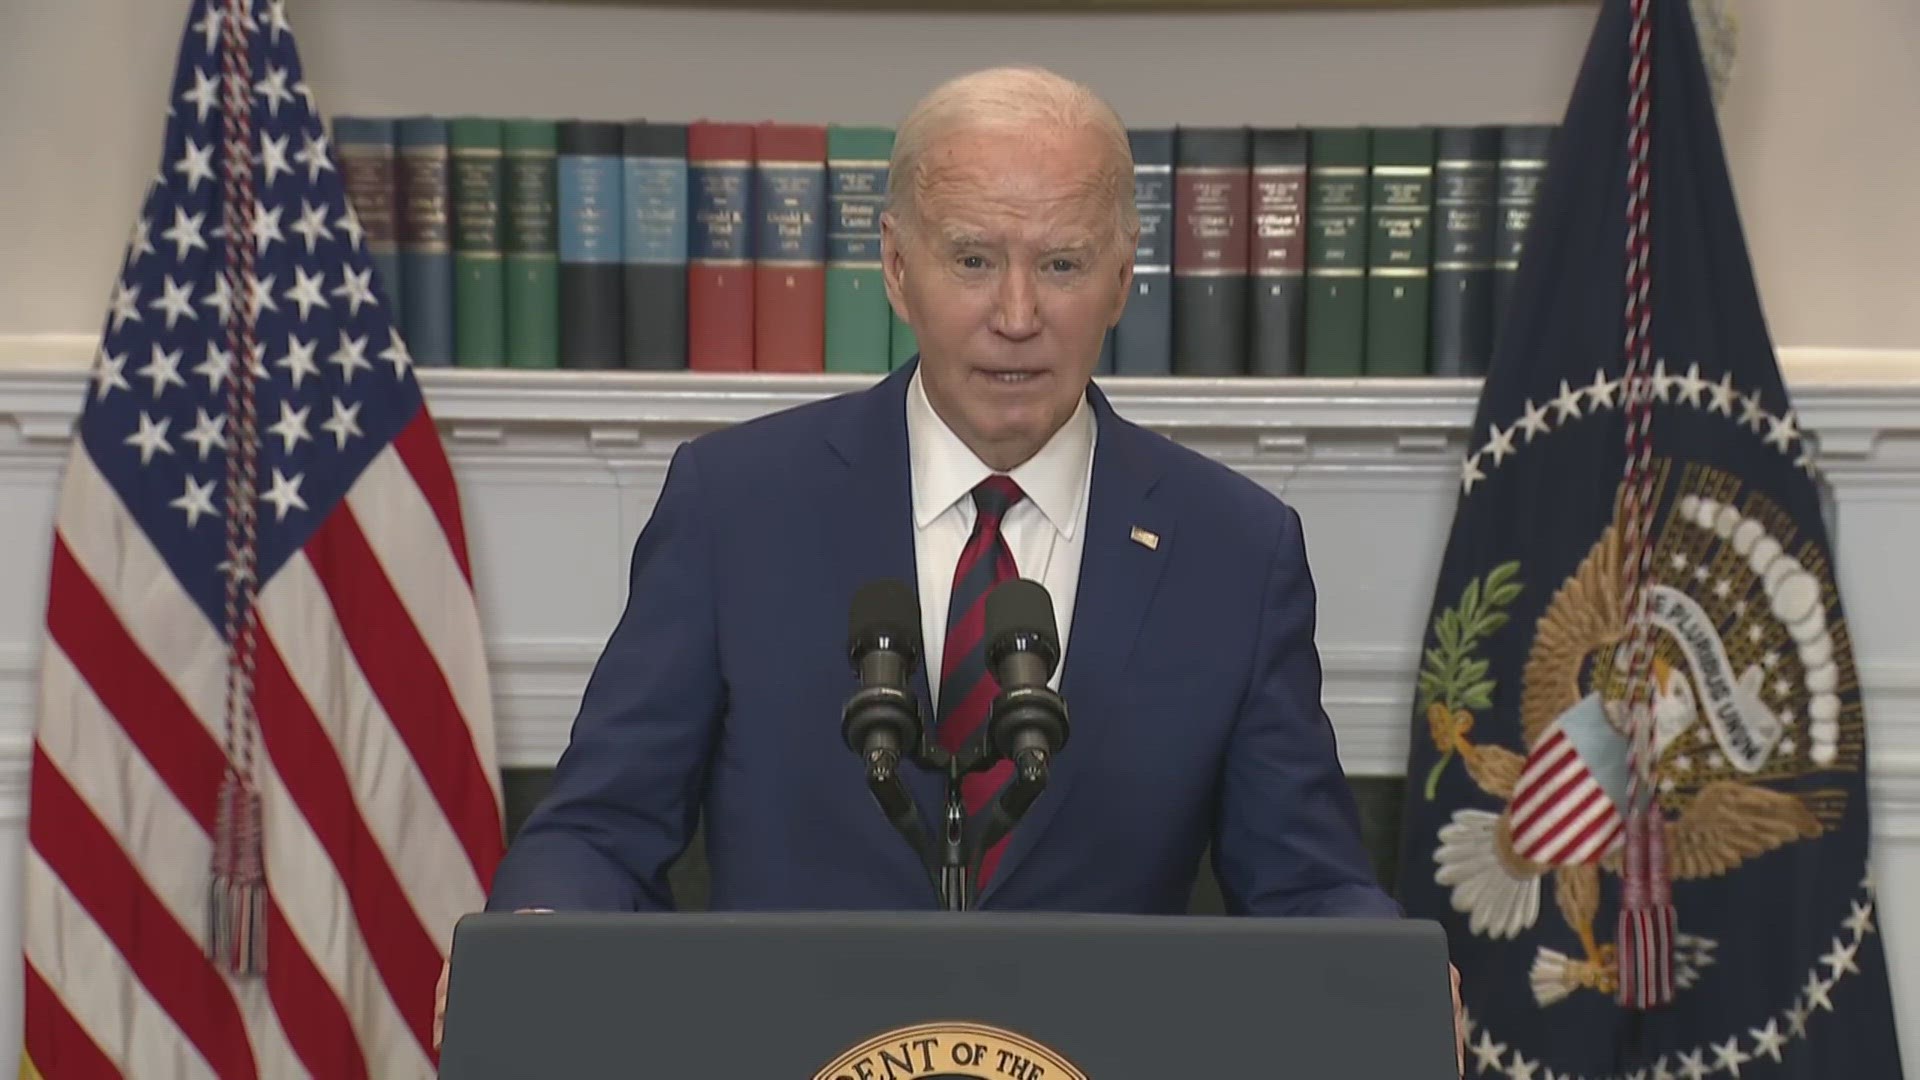 President Biden is set to deliver remarks at 12:30 p.m. after the collapse of the Francis Scott Key Bridge at Baltimore's harbor.